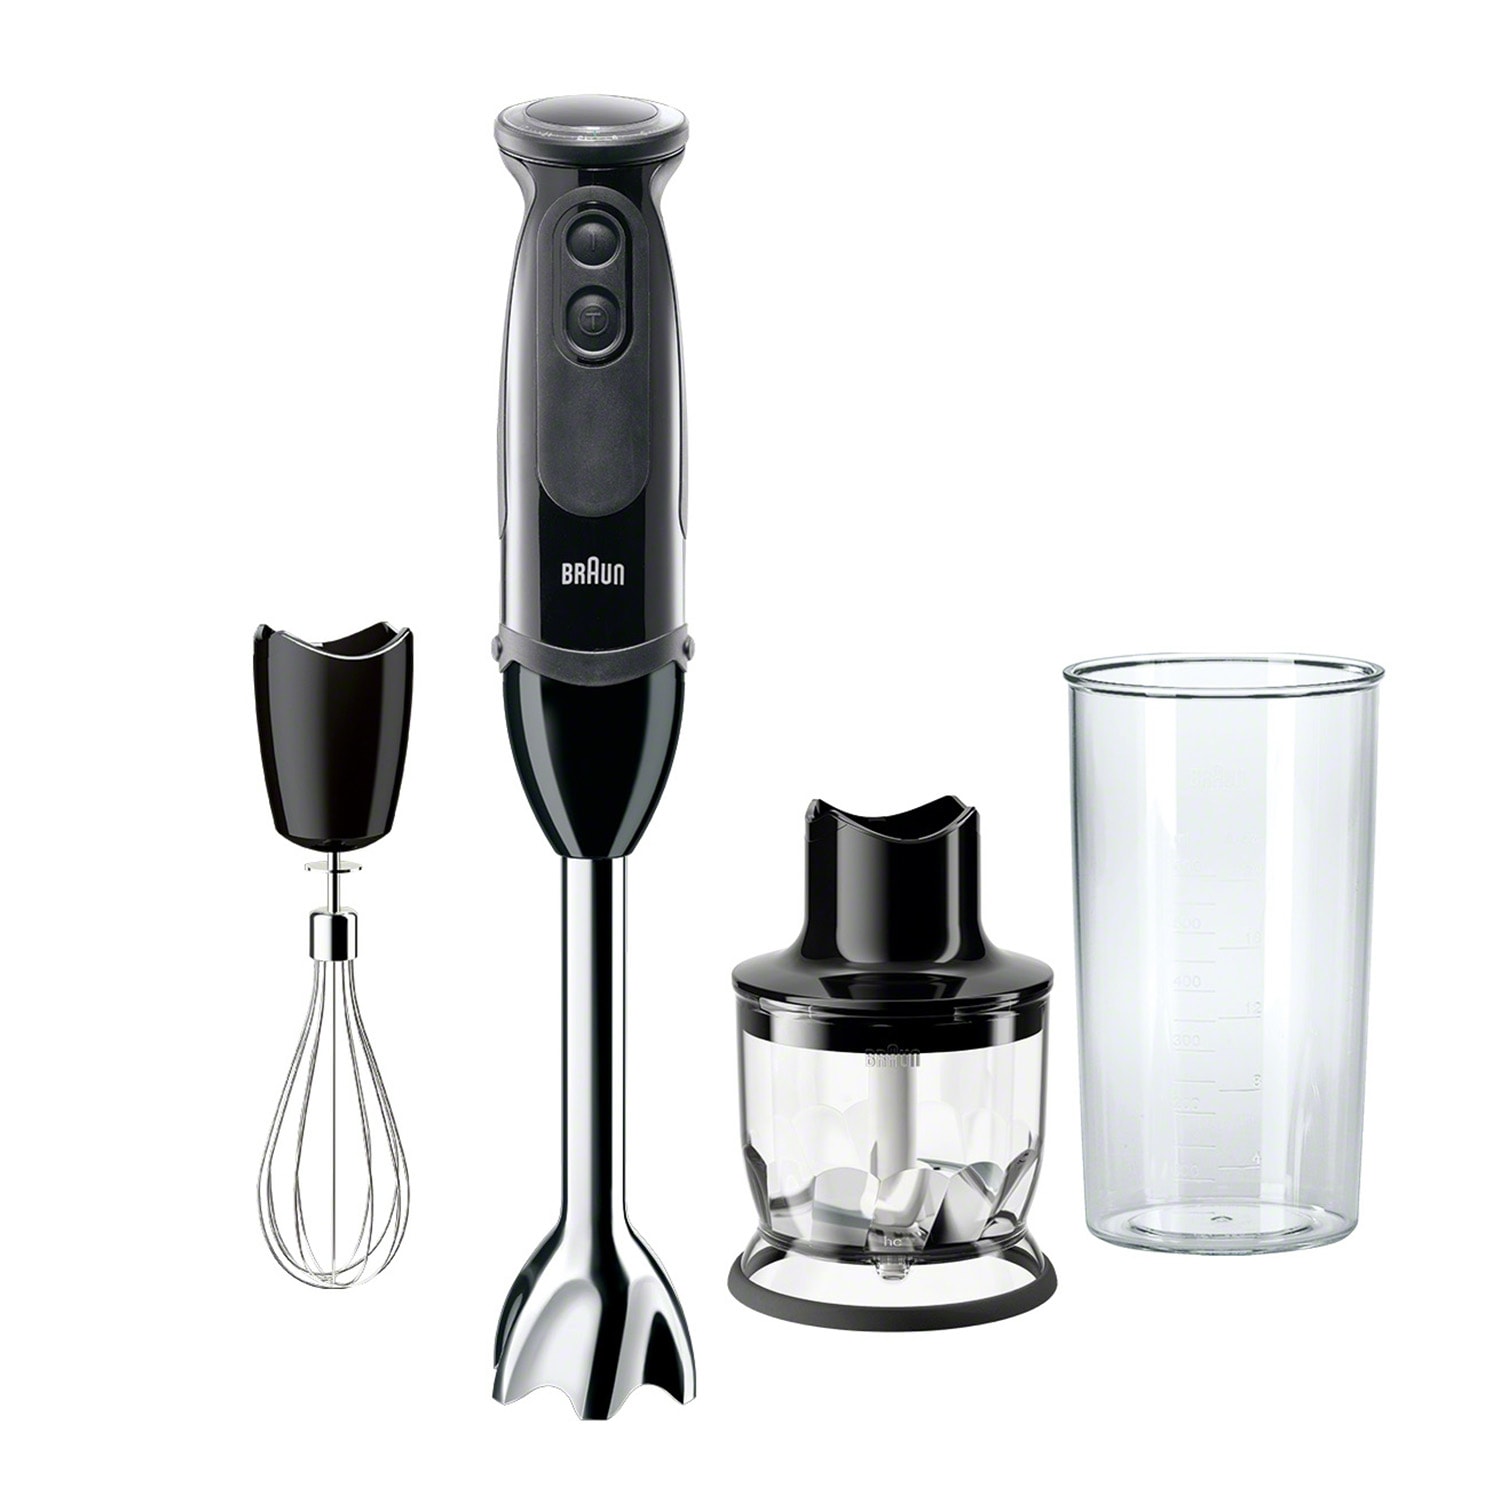 5 Things to Know About Your New Hand Blender